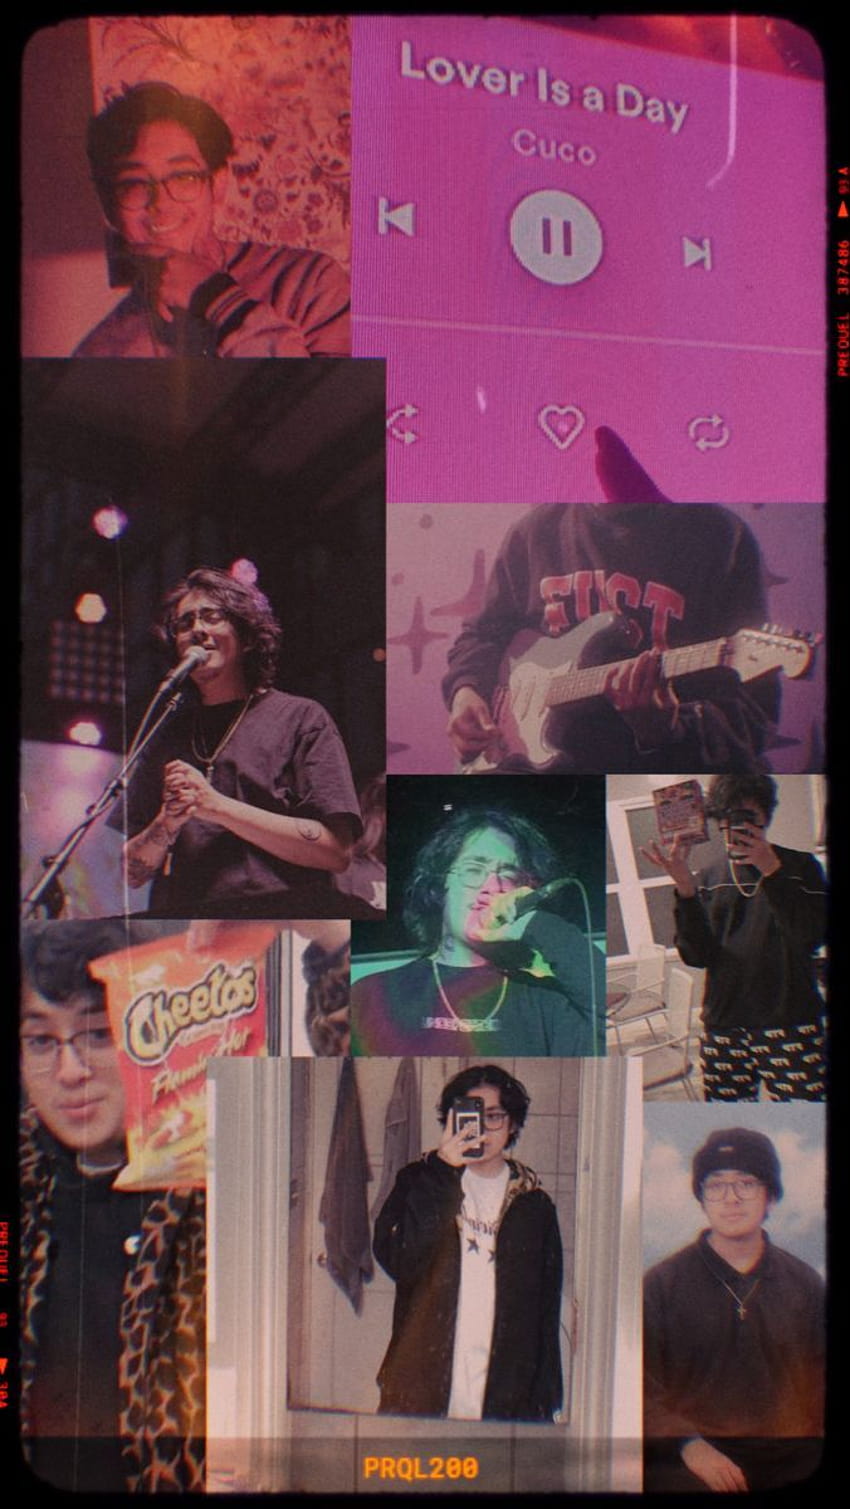 Download Image Cuco brings his unique sound of Los Angeles to the world  Wallpaper  Wallpaperscom